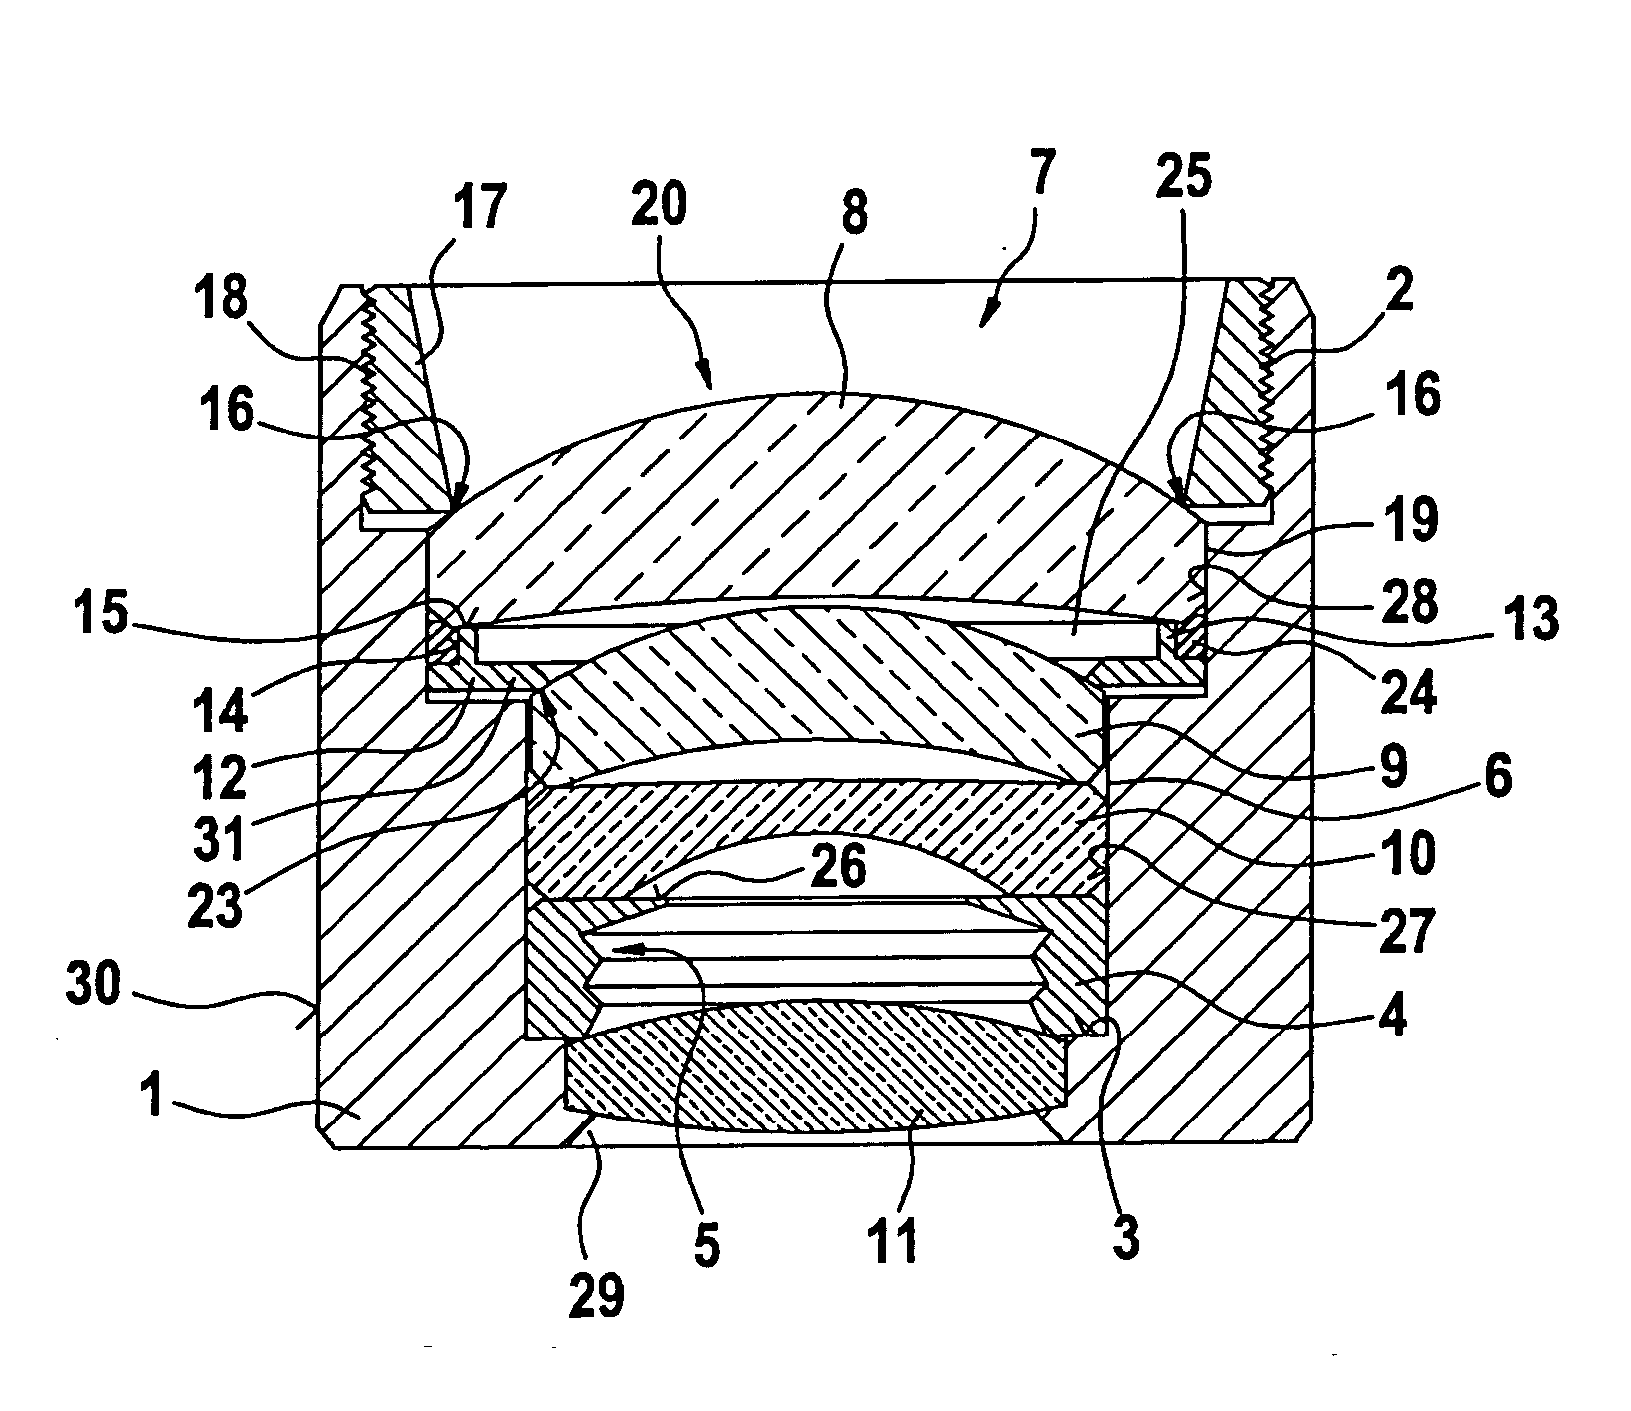 Compound Lens Having a Sealing Configuration Suitable For Motor Vehicles